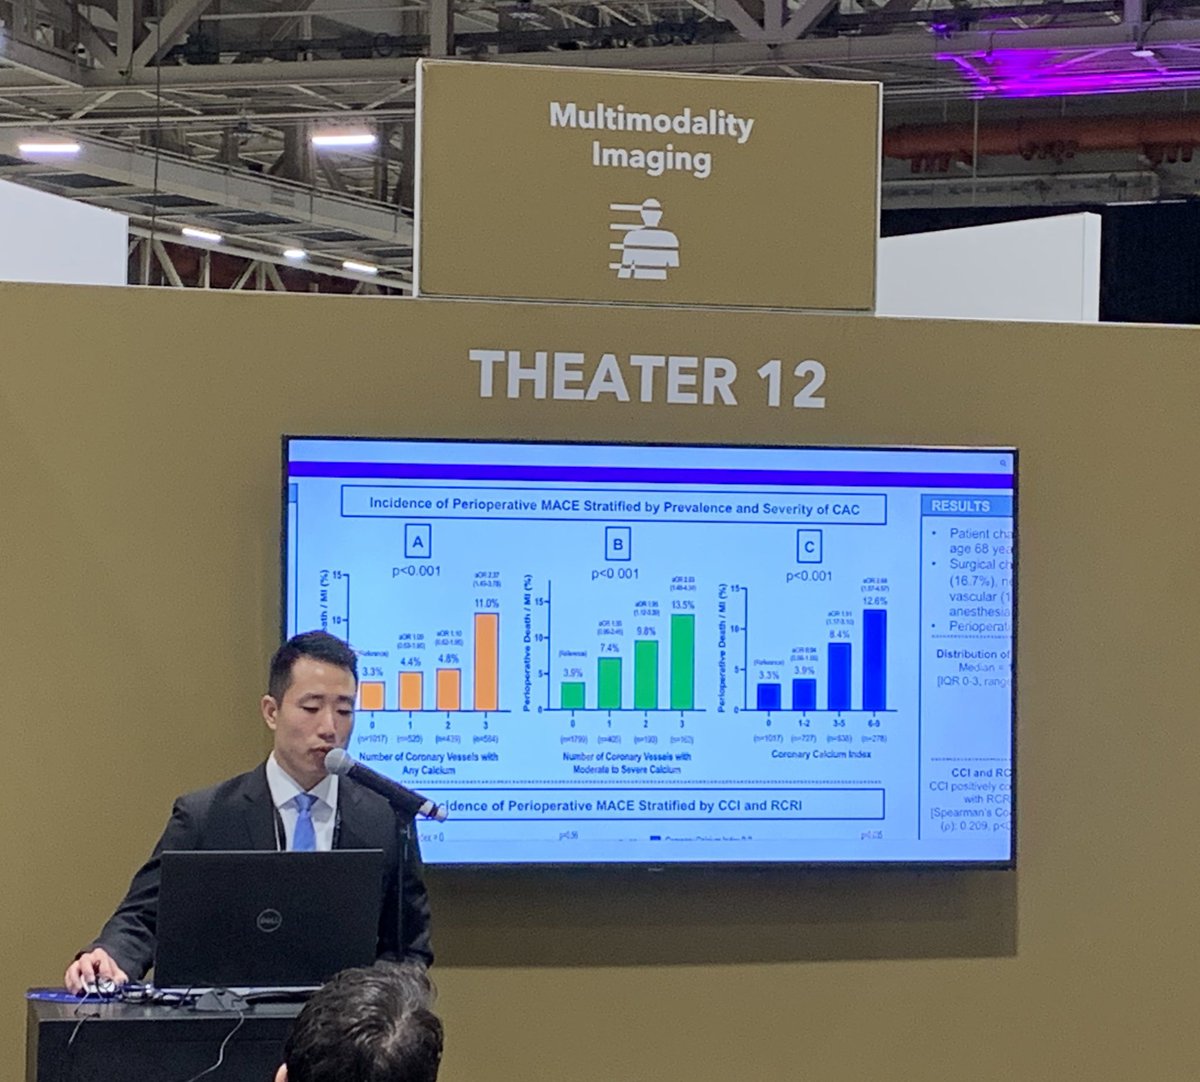 Coronary calcium from pre-existing non-gated CT scans can improve risk prediction prior to non-cardiac surgery presented at ACC. Excellent presentation by @danchoiii @glennfishman @DHayesMD @nyugrossman @nyulangone